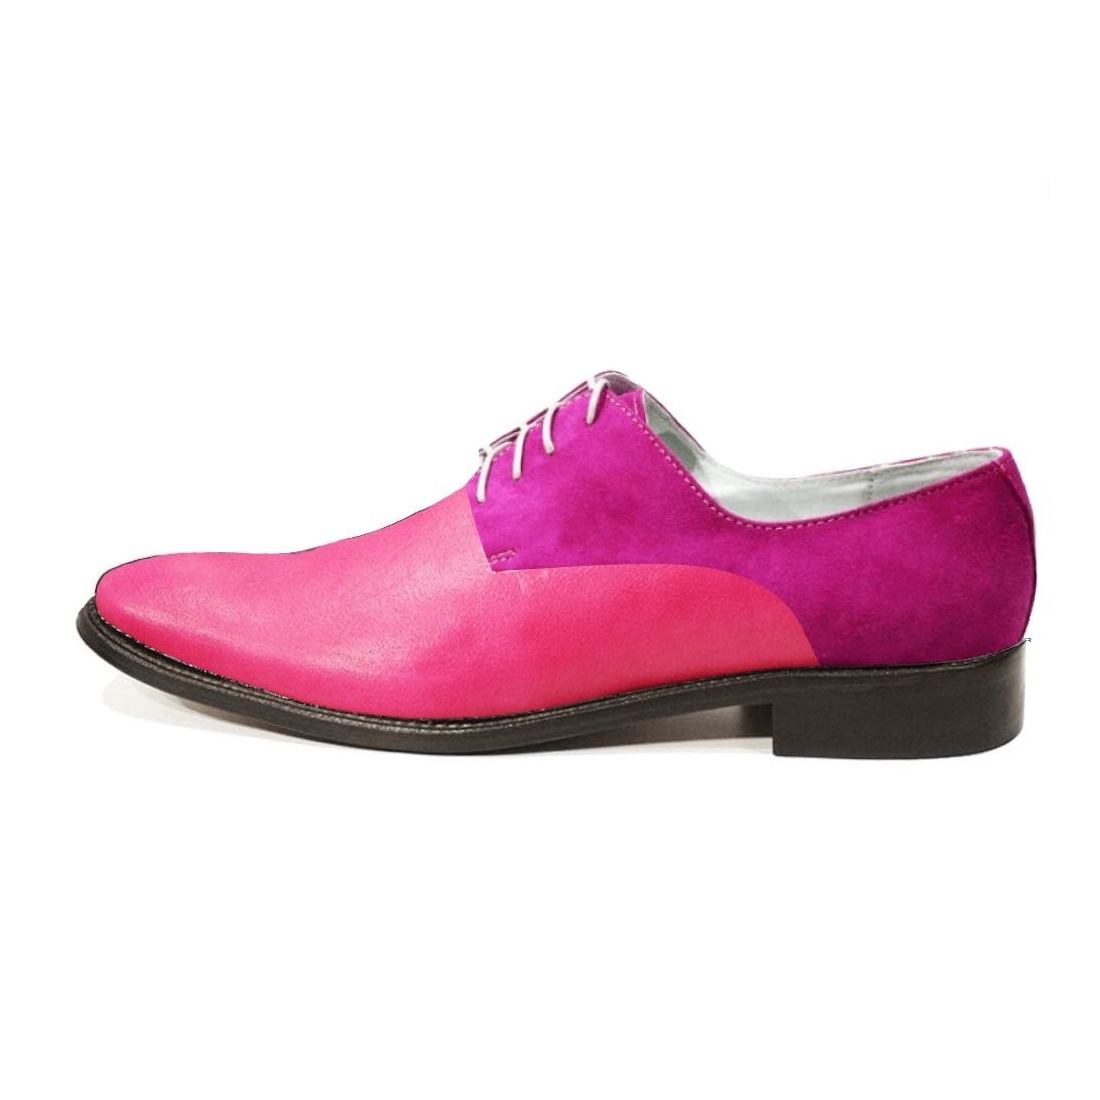 Modello Brygido - Pink Lace-Up Oxfords Dress Shoes https://creator ...